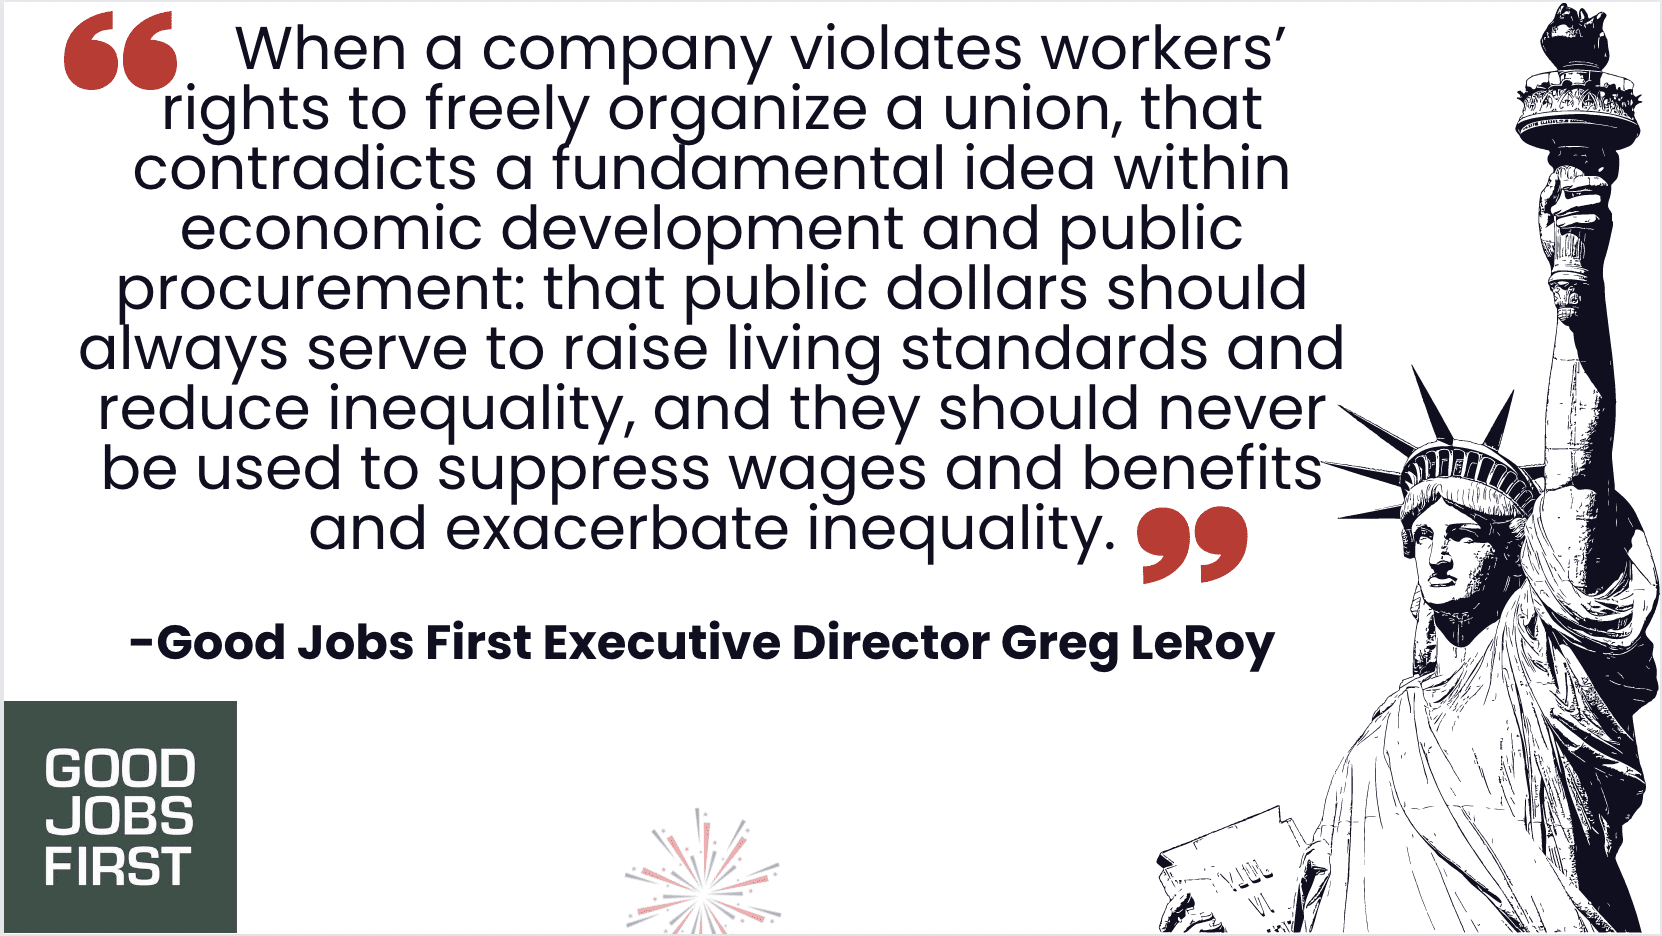 Picture of State of Liberty and quote from Good Jobs First Executive Director Greg LeRoy